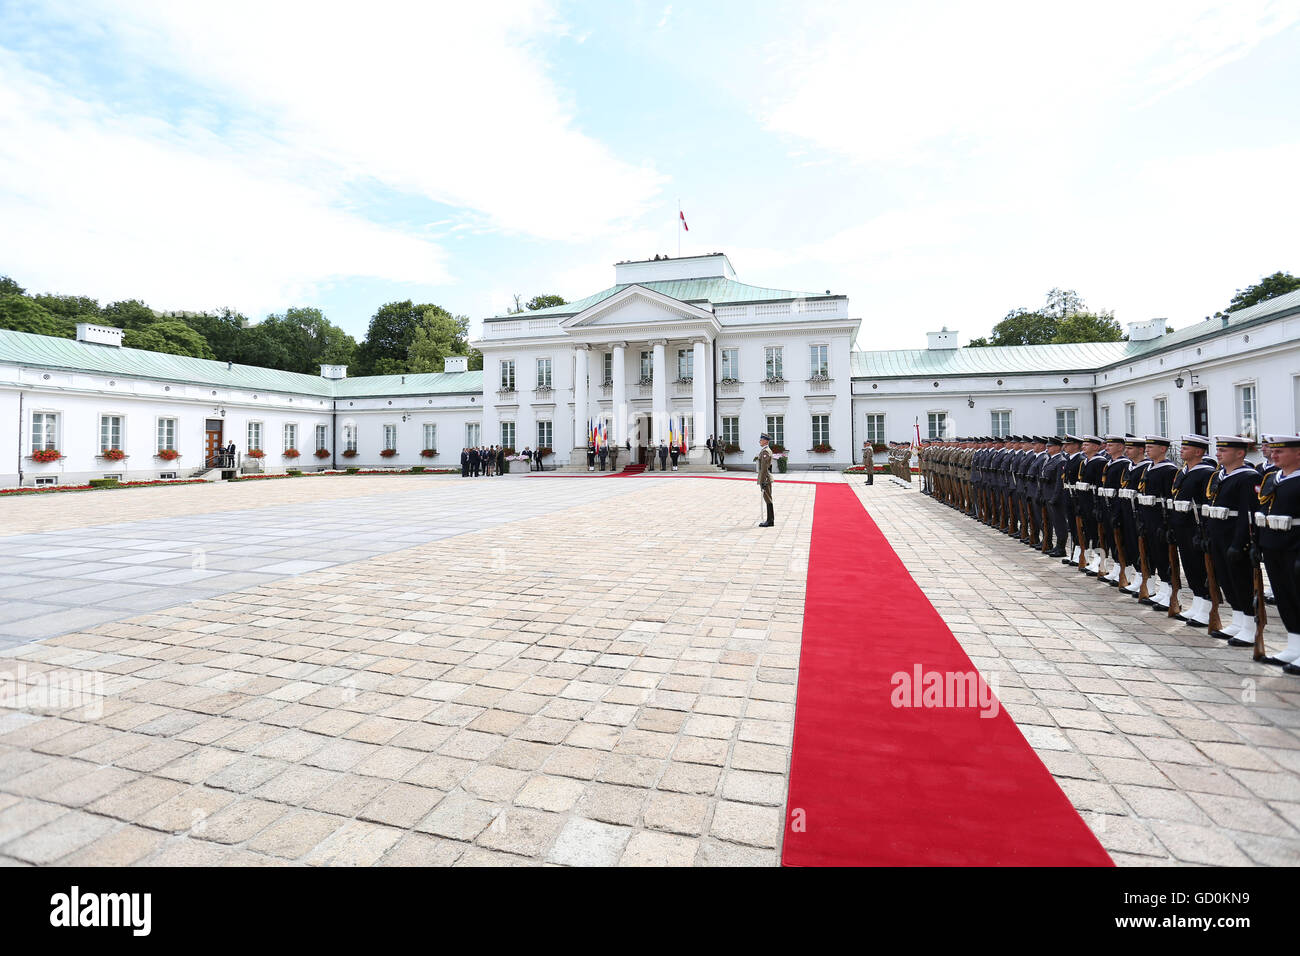 Warsaw, Poland. 10th July, 2016. Romanian President Iohannis was received by President Duda Credit:  Jake Ratz/Alamy Live News Stock Photo